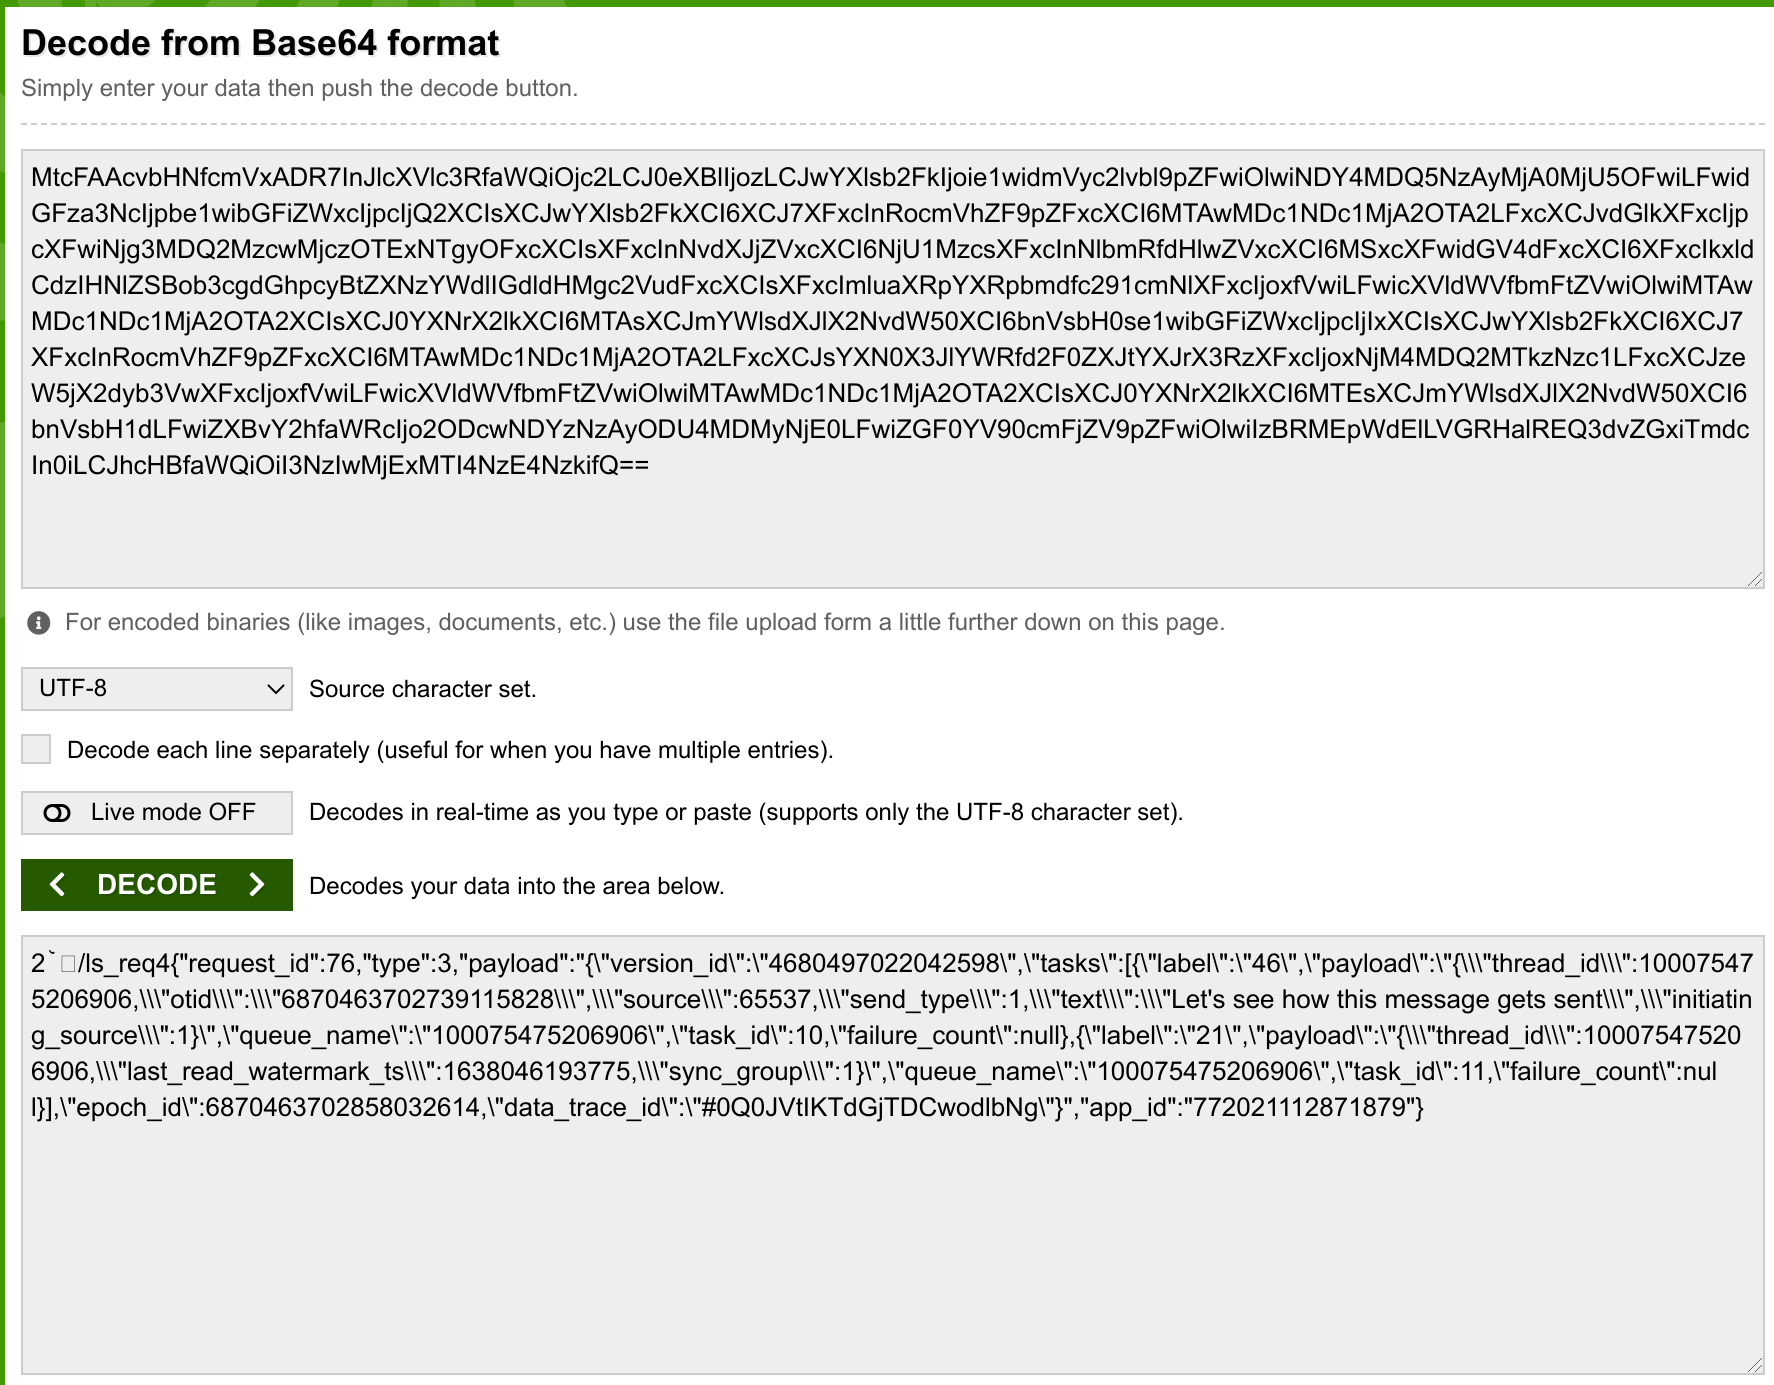 Using base64decode.org to decode the websocket
message